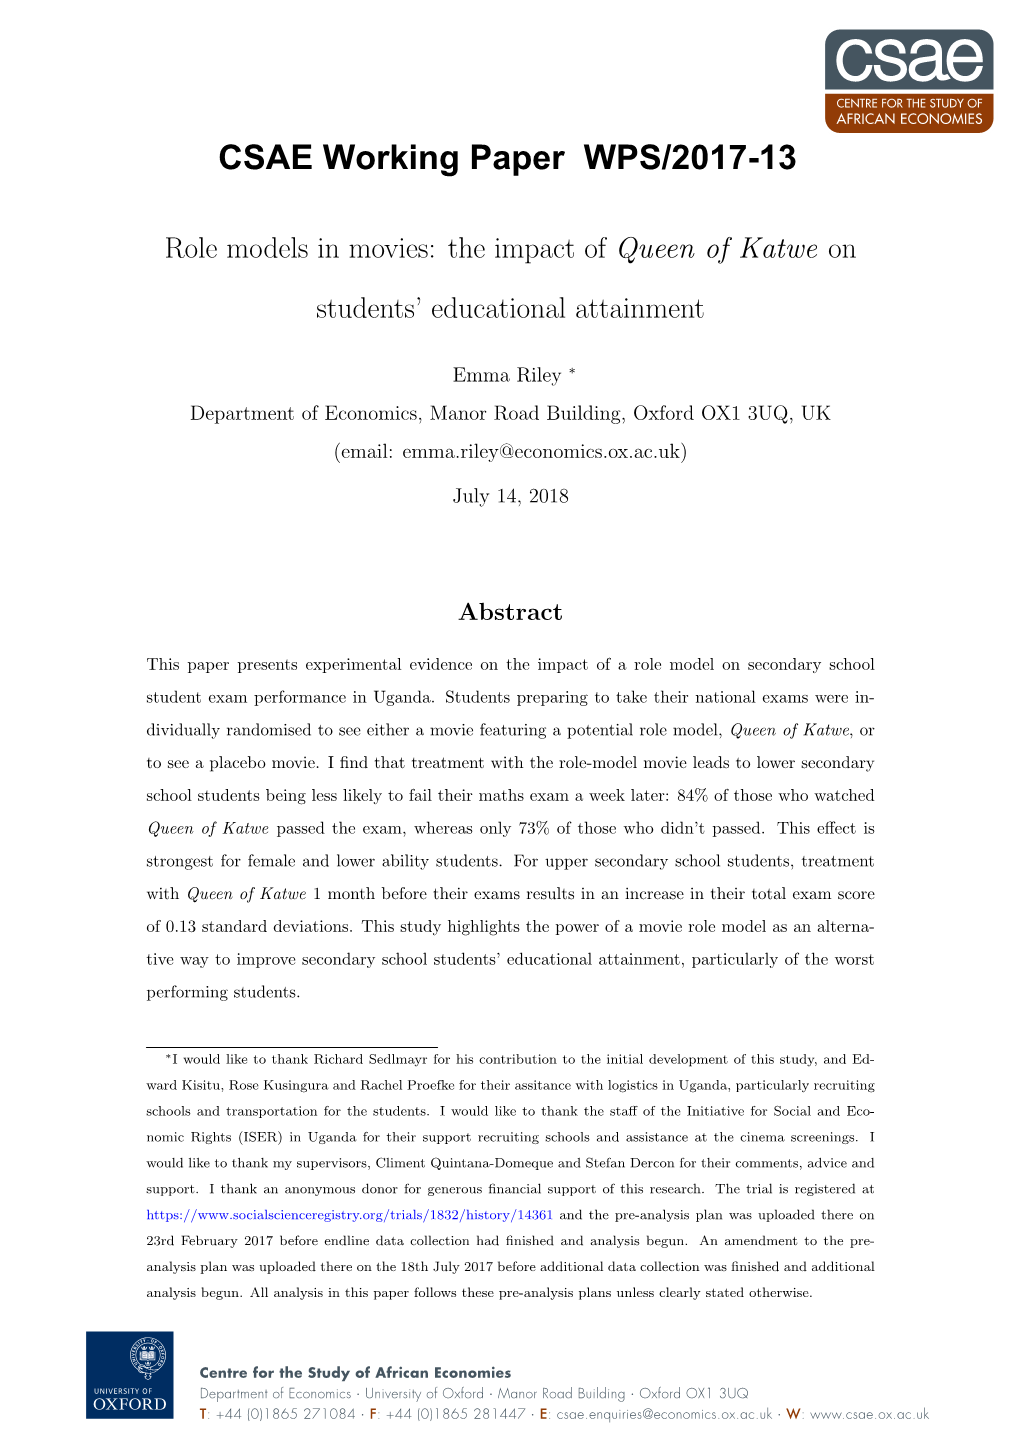 The Impact of Queen of Katwe on Students' Educational Attainment